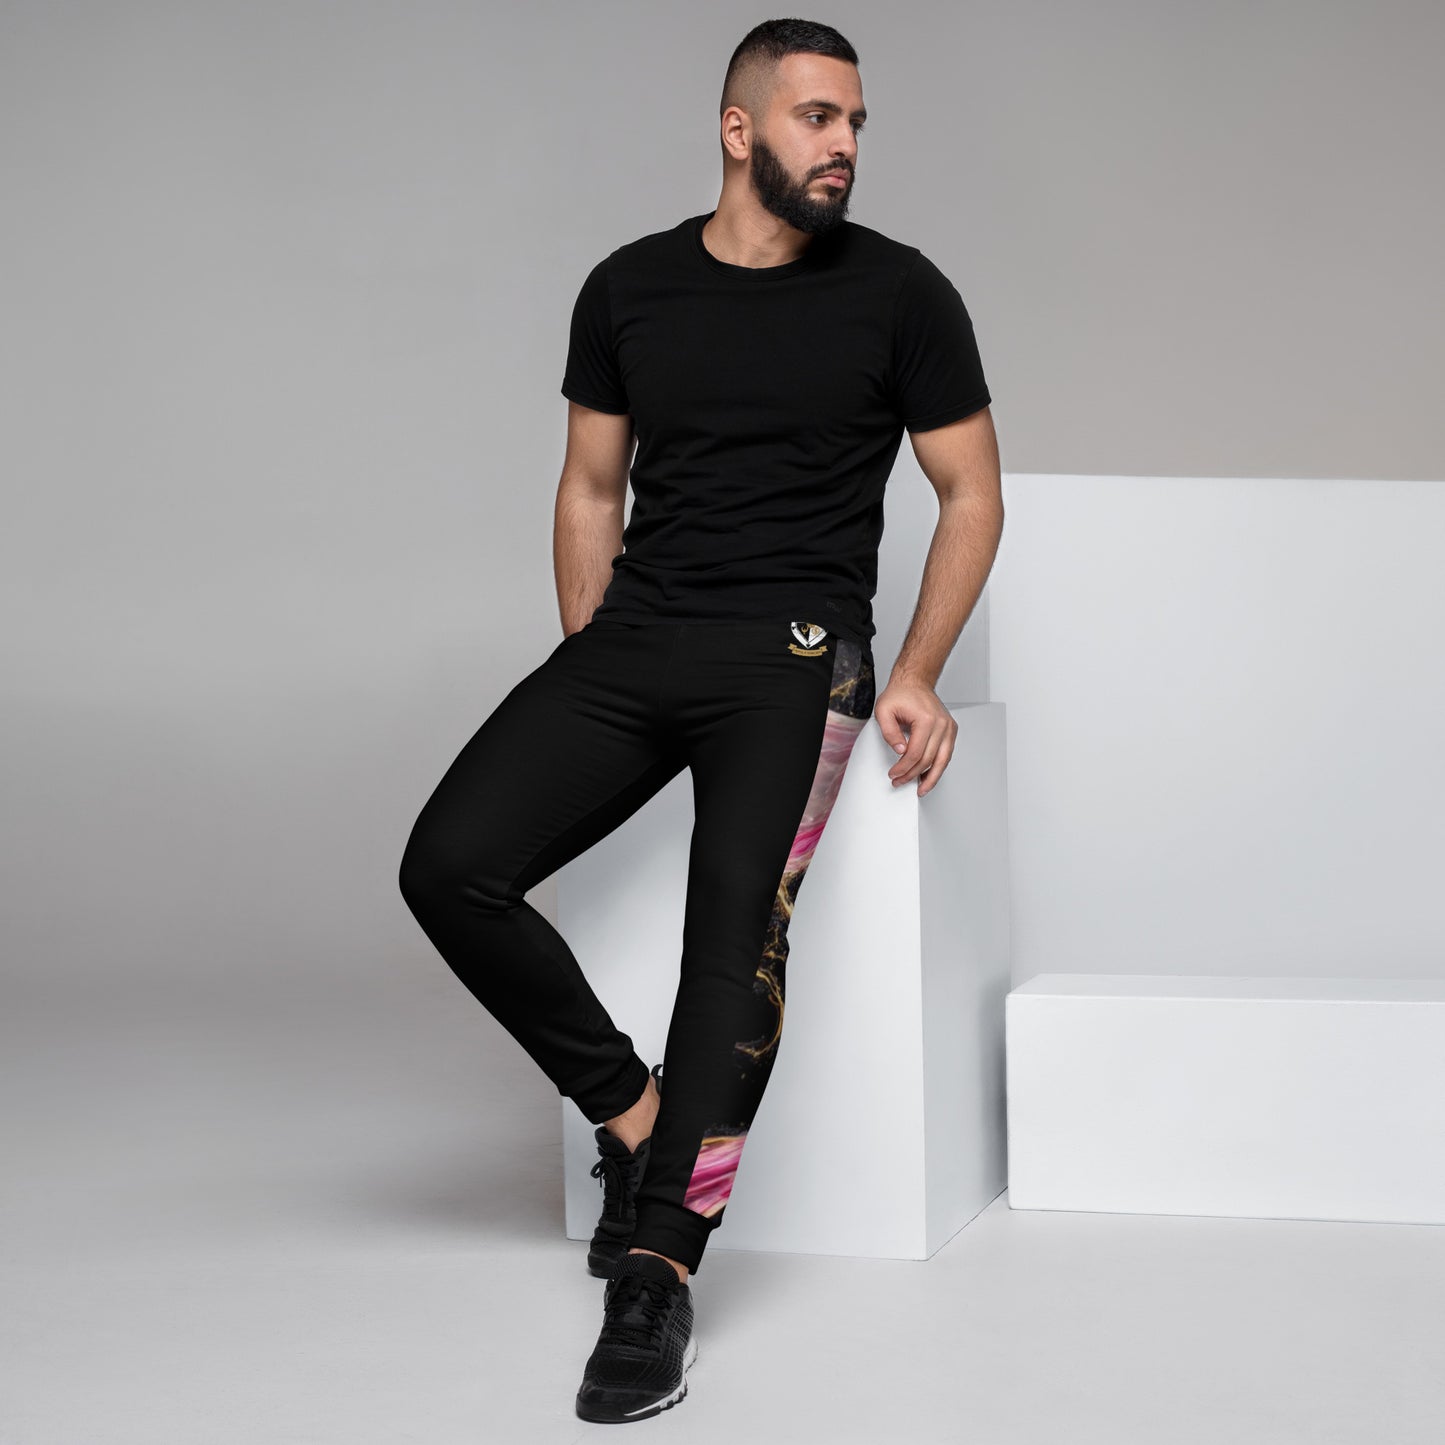 8xquiZit Collection T8T Pynk, Black, N Gold Marble Men's Joggers - Black